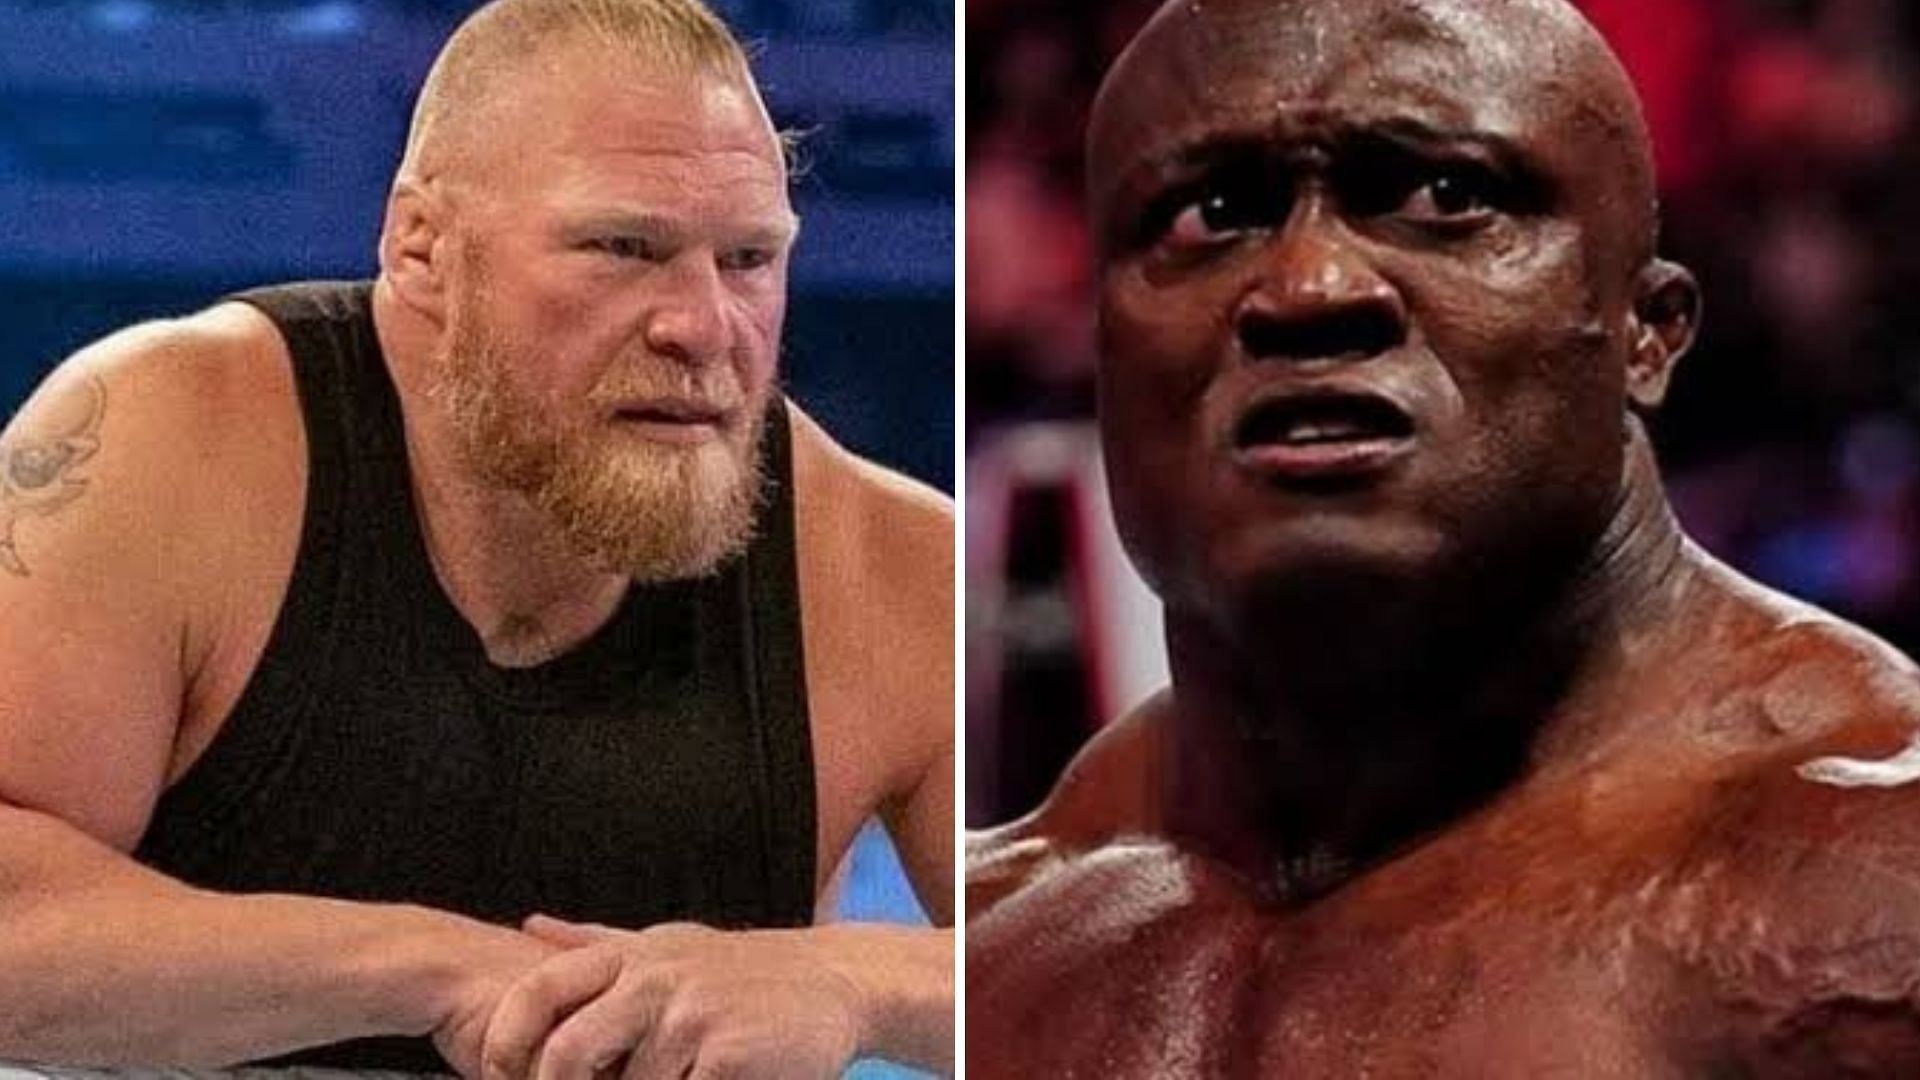 Lesnar and Lashley are two of WWE